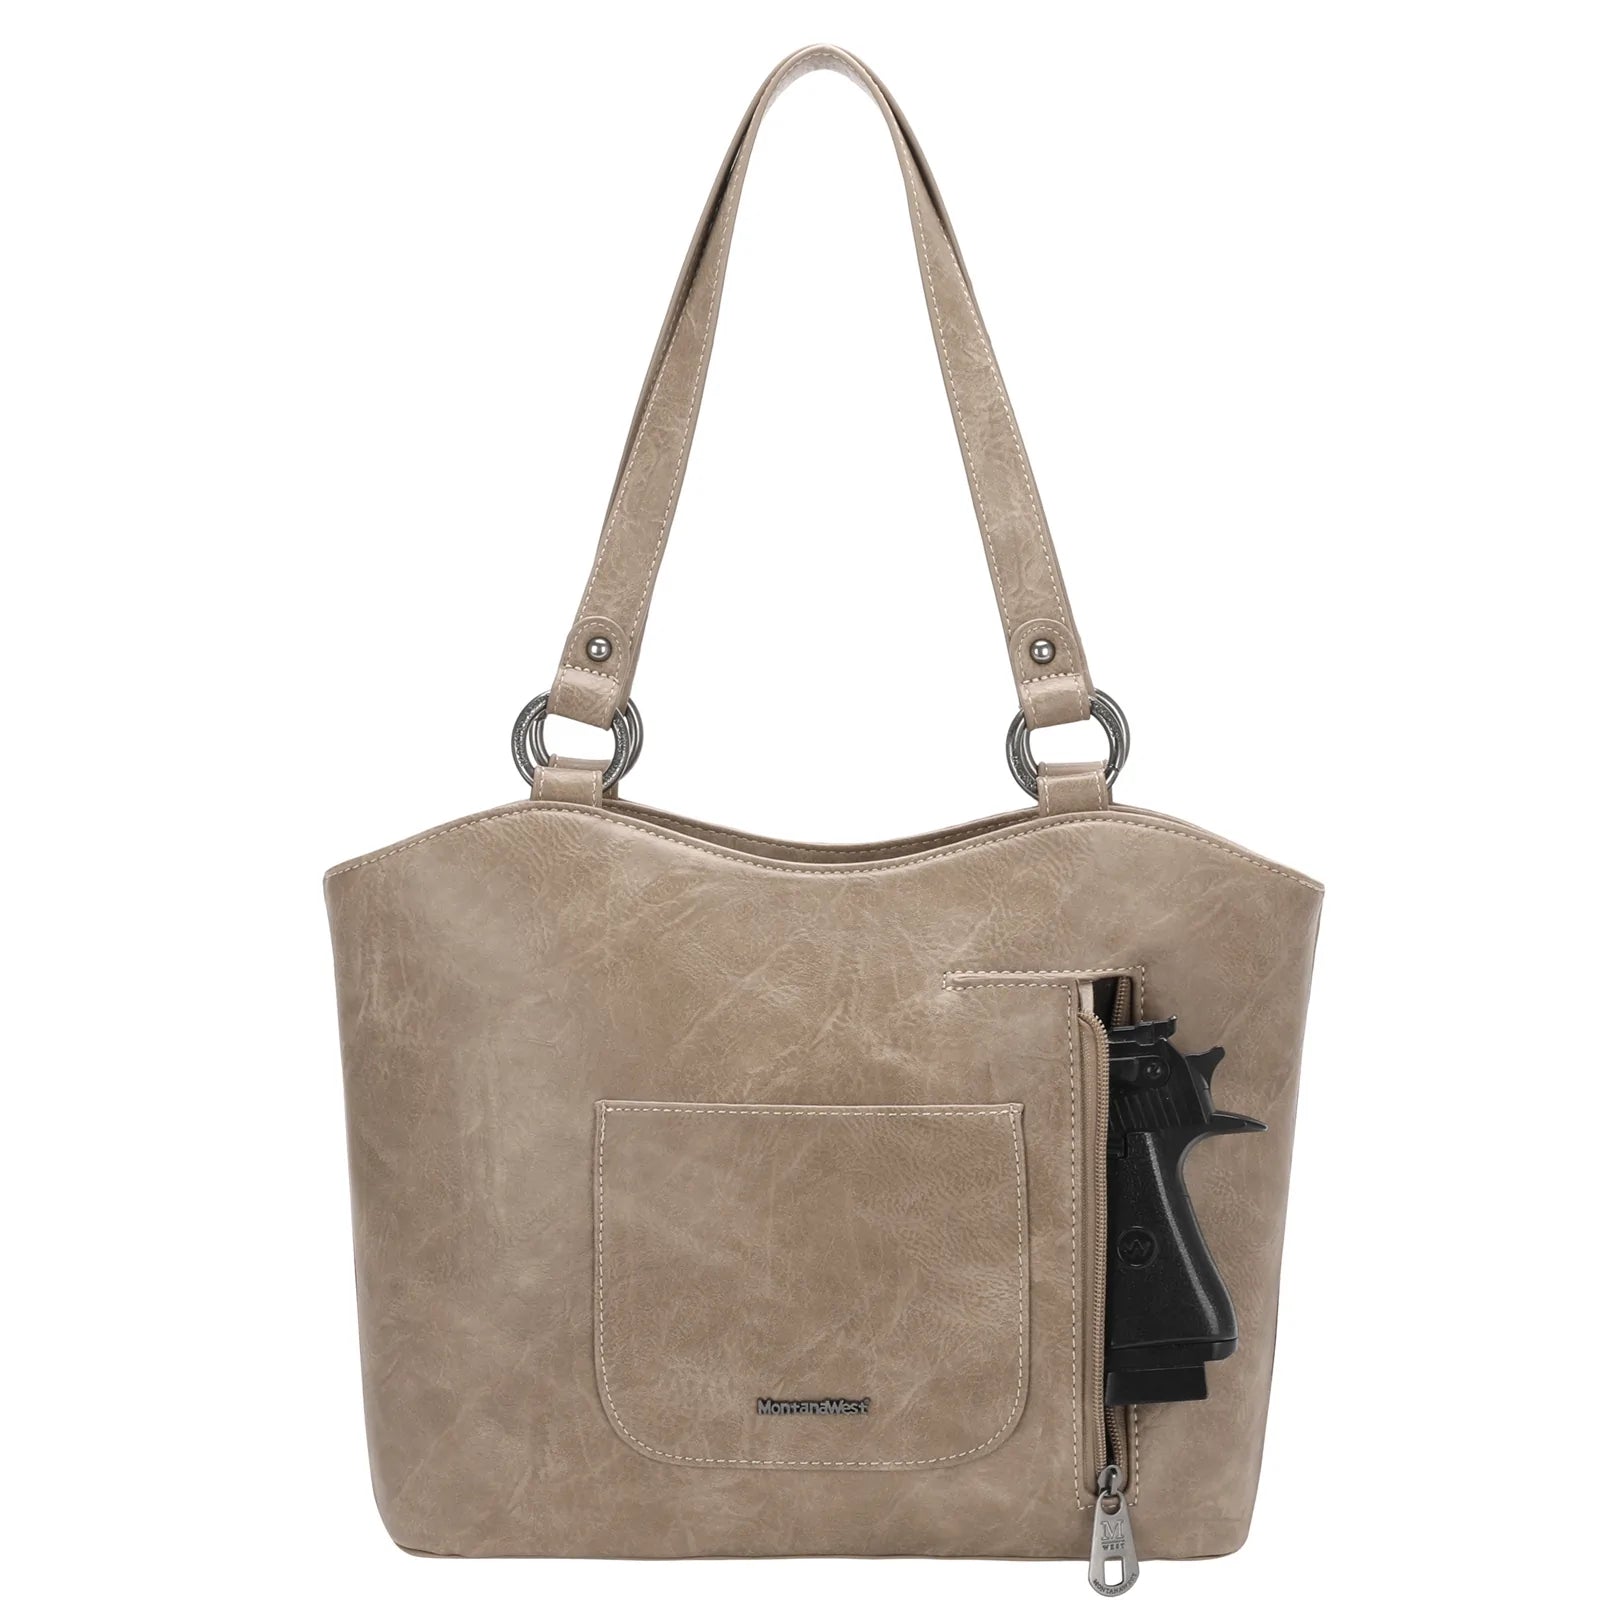 West Fringe Collection Concealed Carry Tote